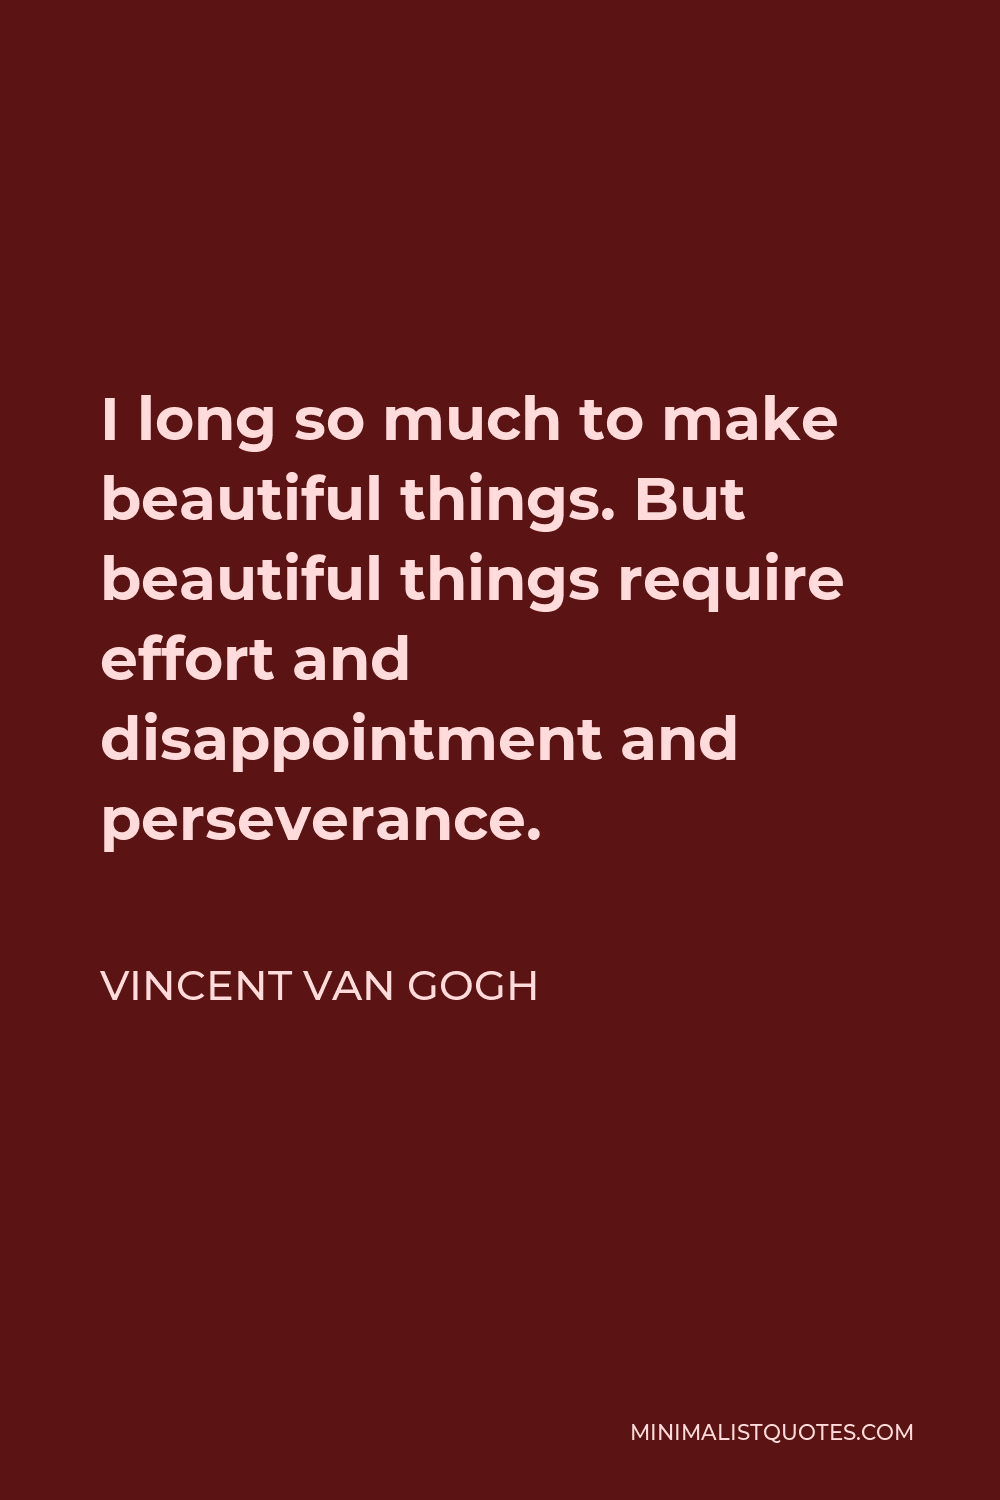 Vincent Van Gogh Quote - I long so much to make beautiful things. But beautiful things require effort and disappointment and perseverance.